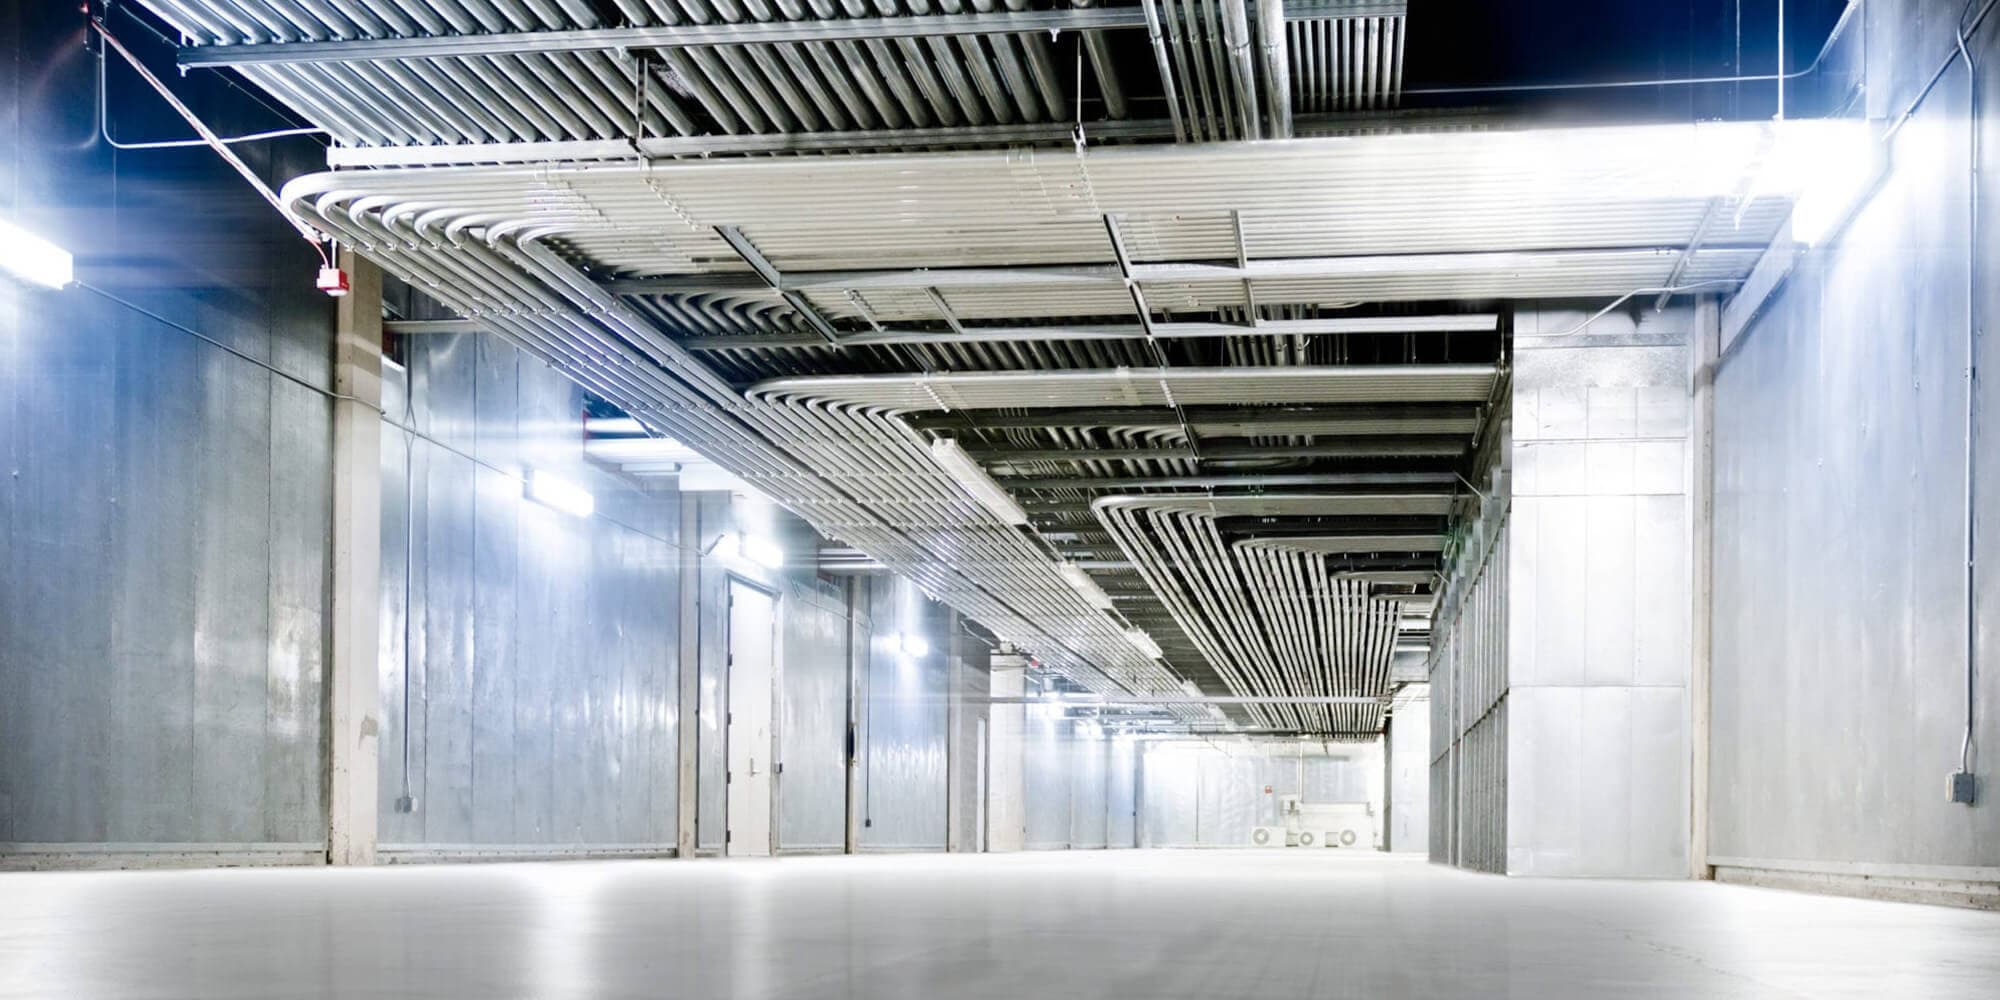 Low-angle shot of an empty corridor with many electrical conduits running along the ceiling